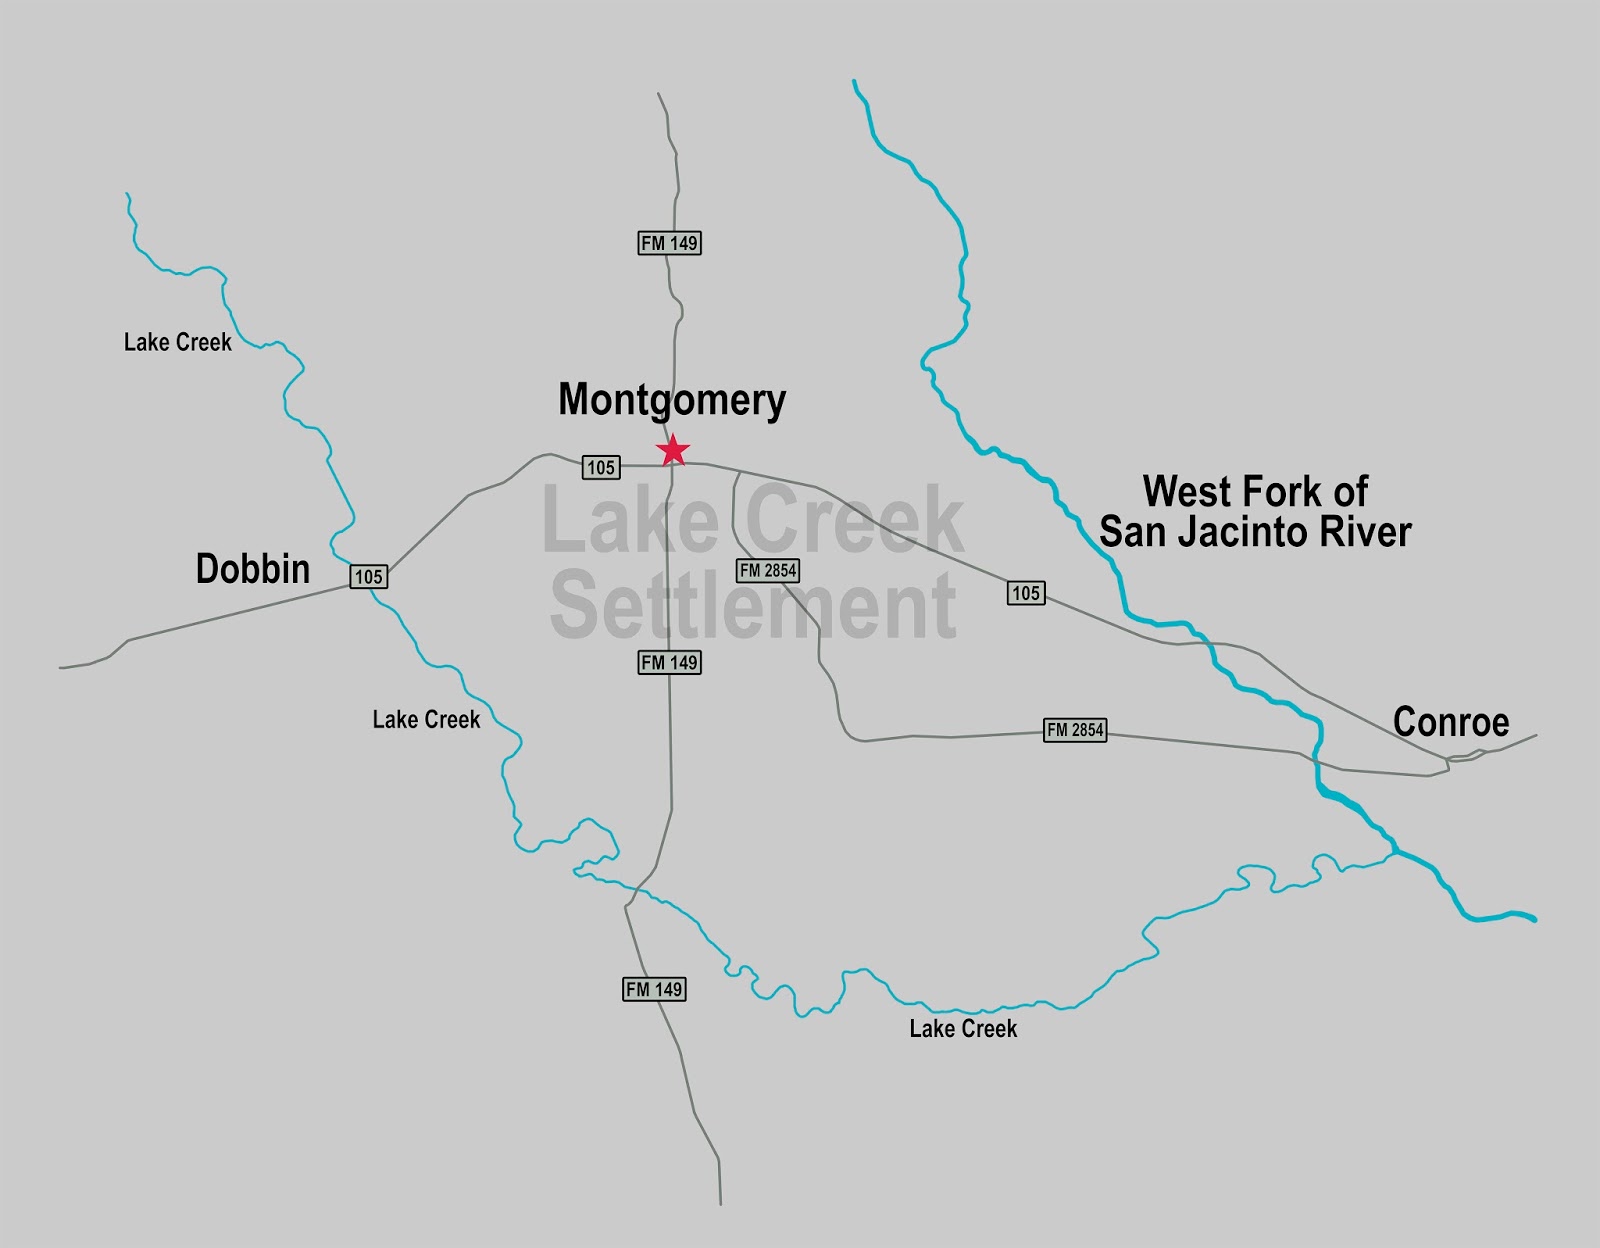 Map Showing Lake Creek Settlement and Current Cities and Roads